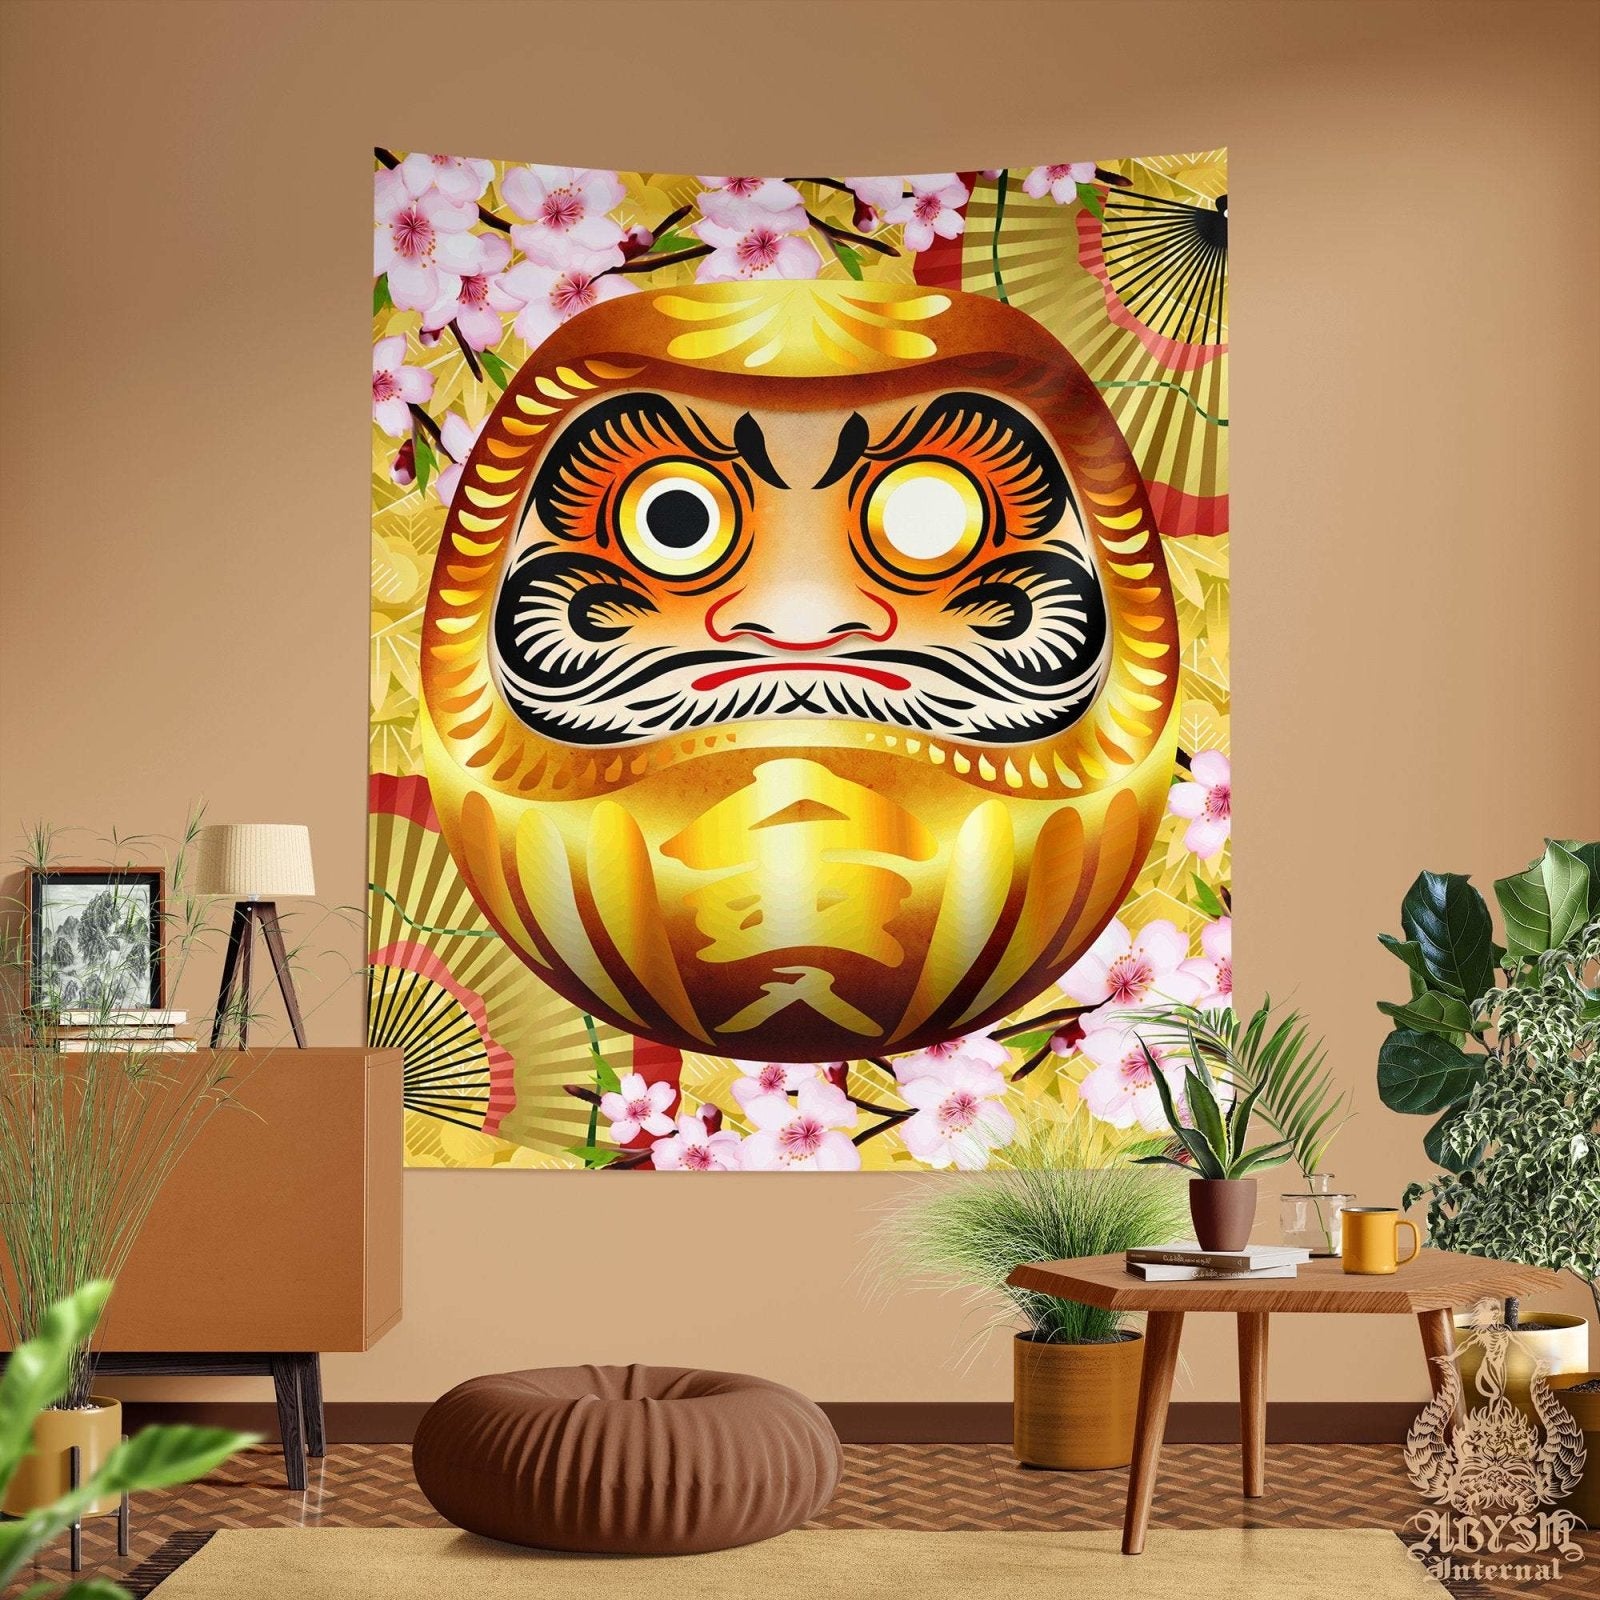 Daruma Tapestry, Anime and Gamer Wall Hanging, Japanese Home Decor, Art Print, Eclectic and Funky - Gold - Abysm Internal